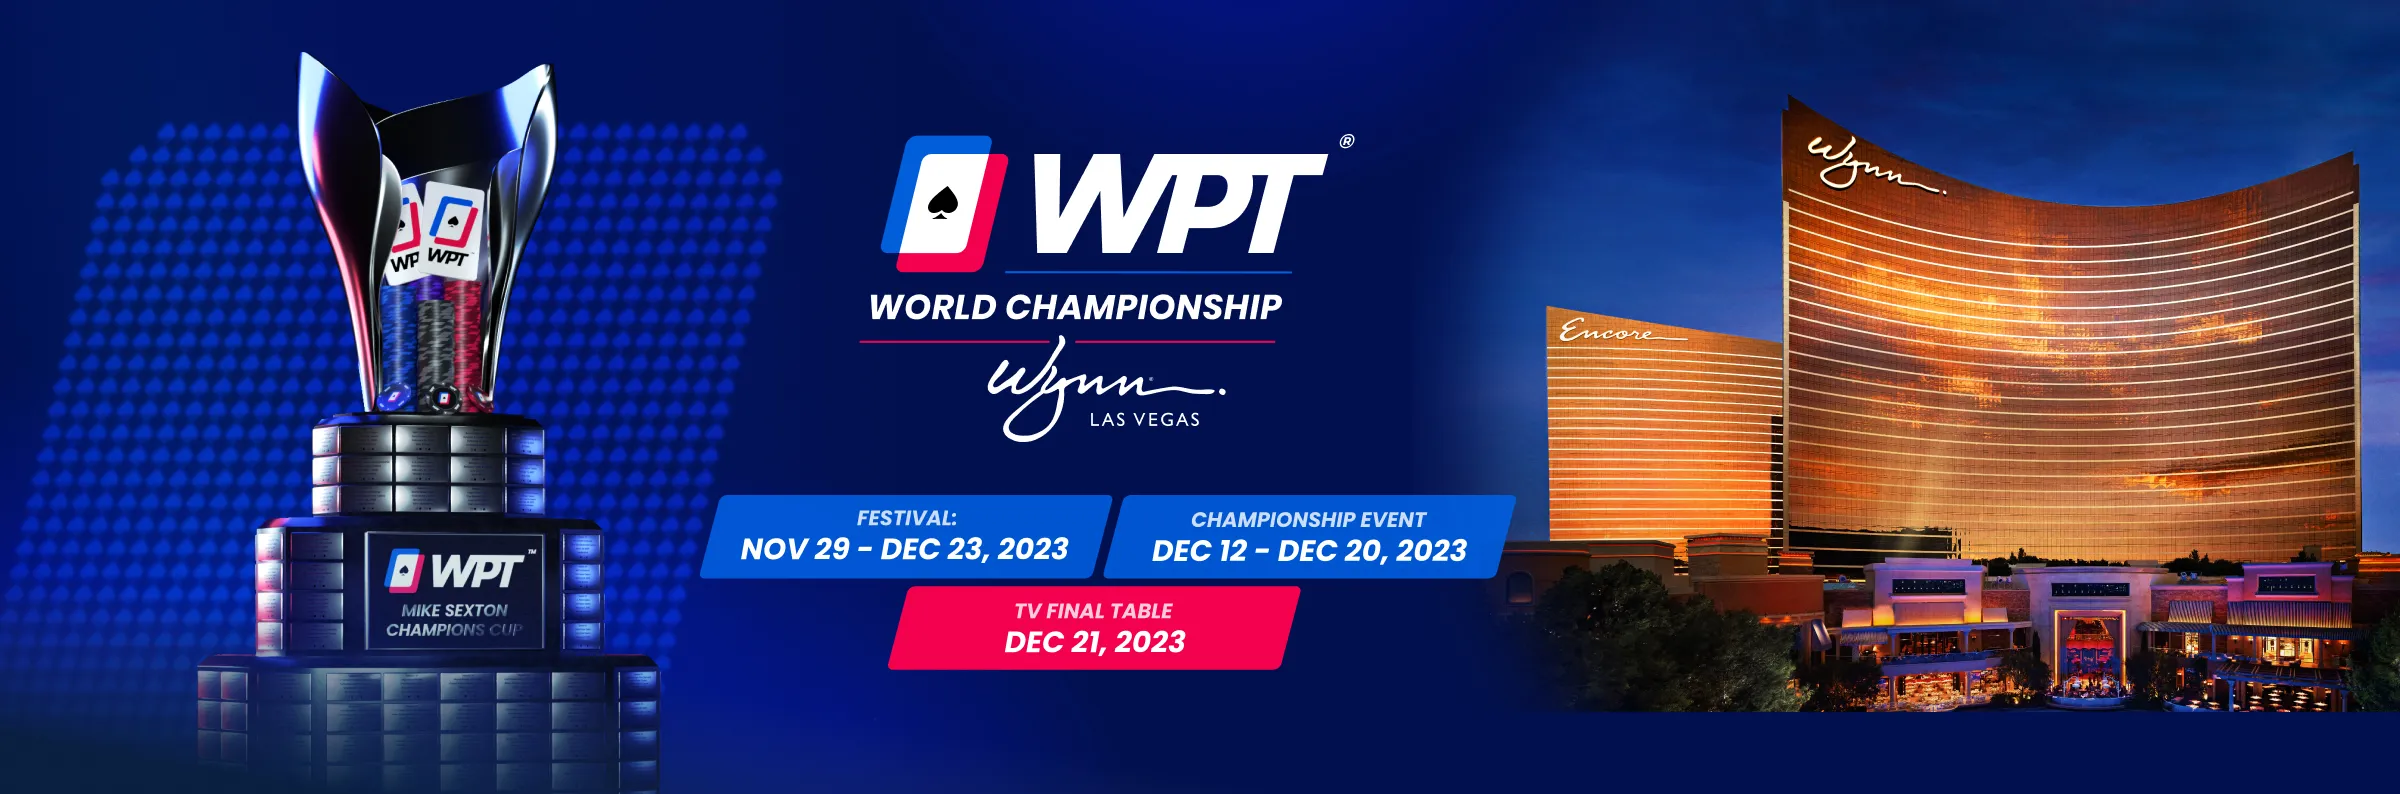 Everything You Need to Know About the 2023 WPT World Championship Festival - PokerPro – online poker – live poker – cash games poker